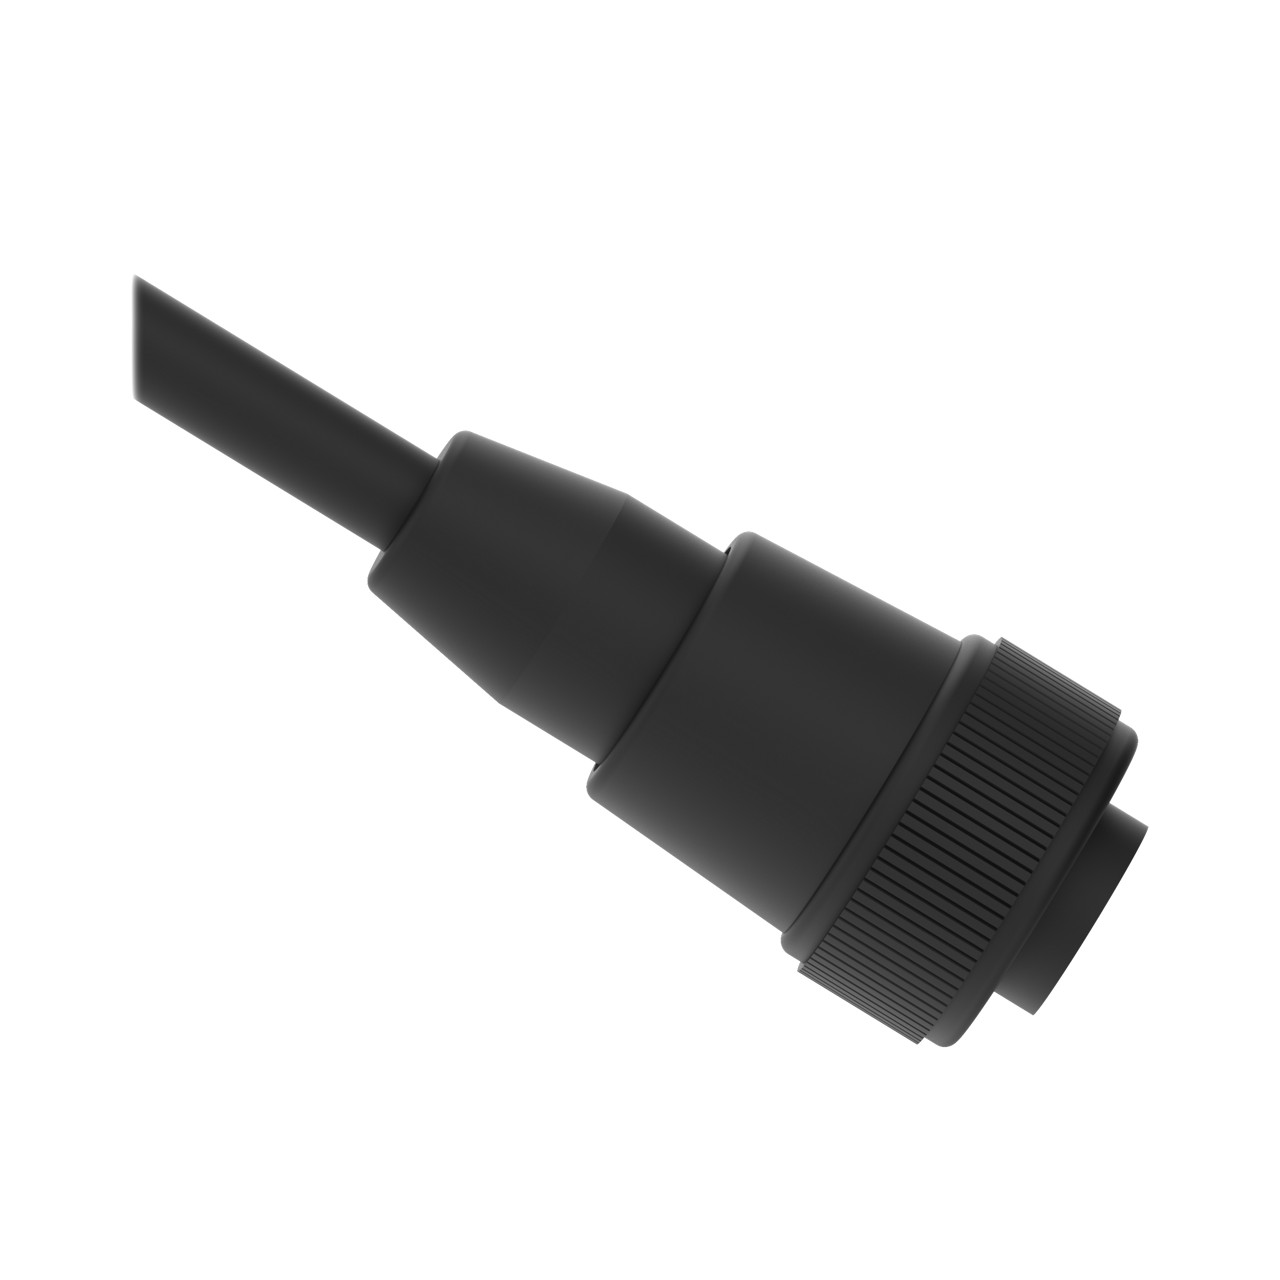 MBCC2-512 - Cordset 7/8 in Single Ended; 5-pin Straight Female Connector with Shield; 4 m (13.12 ft) in Length; Black PVC Jacket, Nylon Black Nut